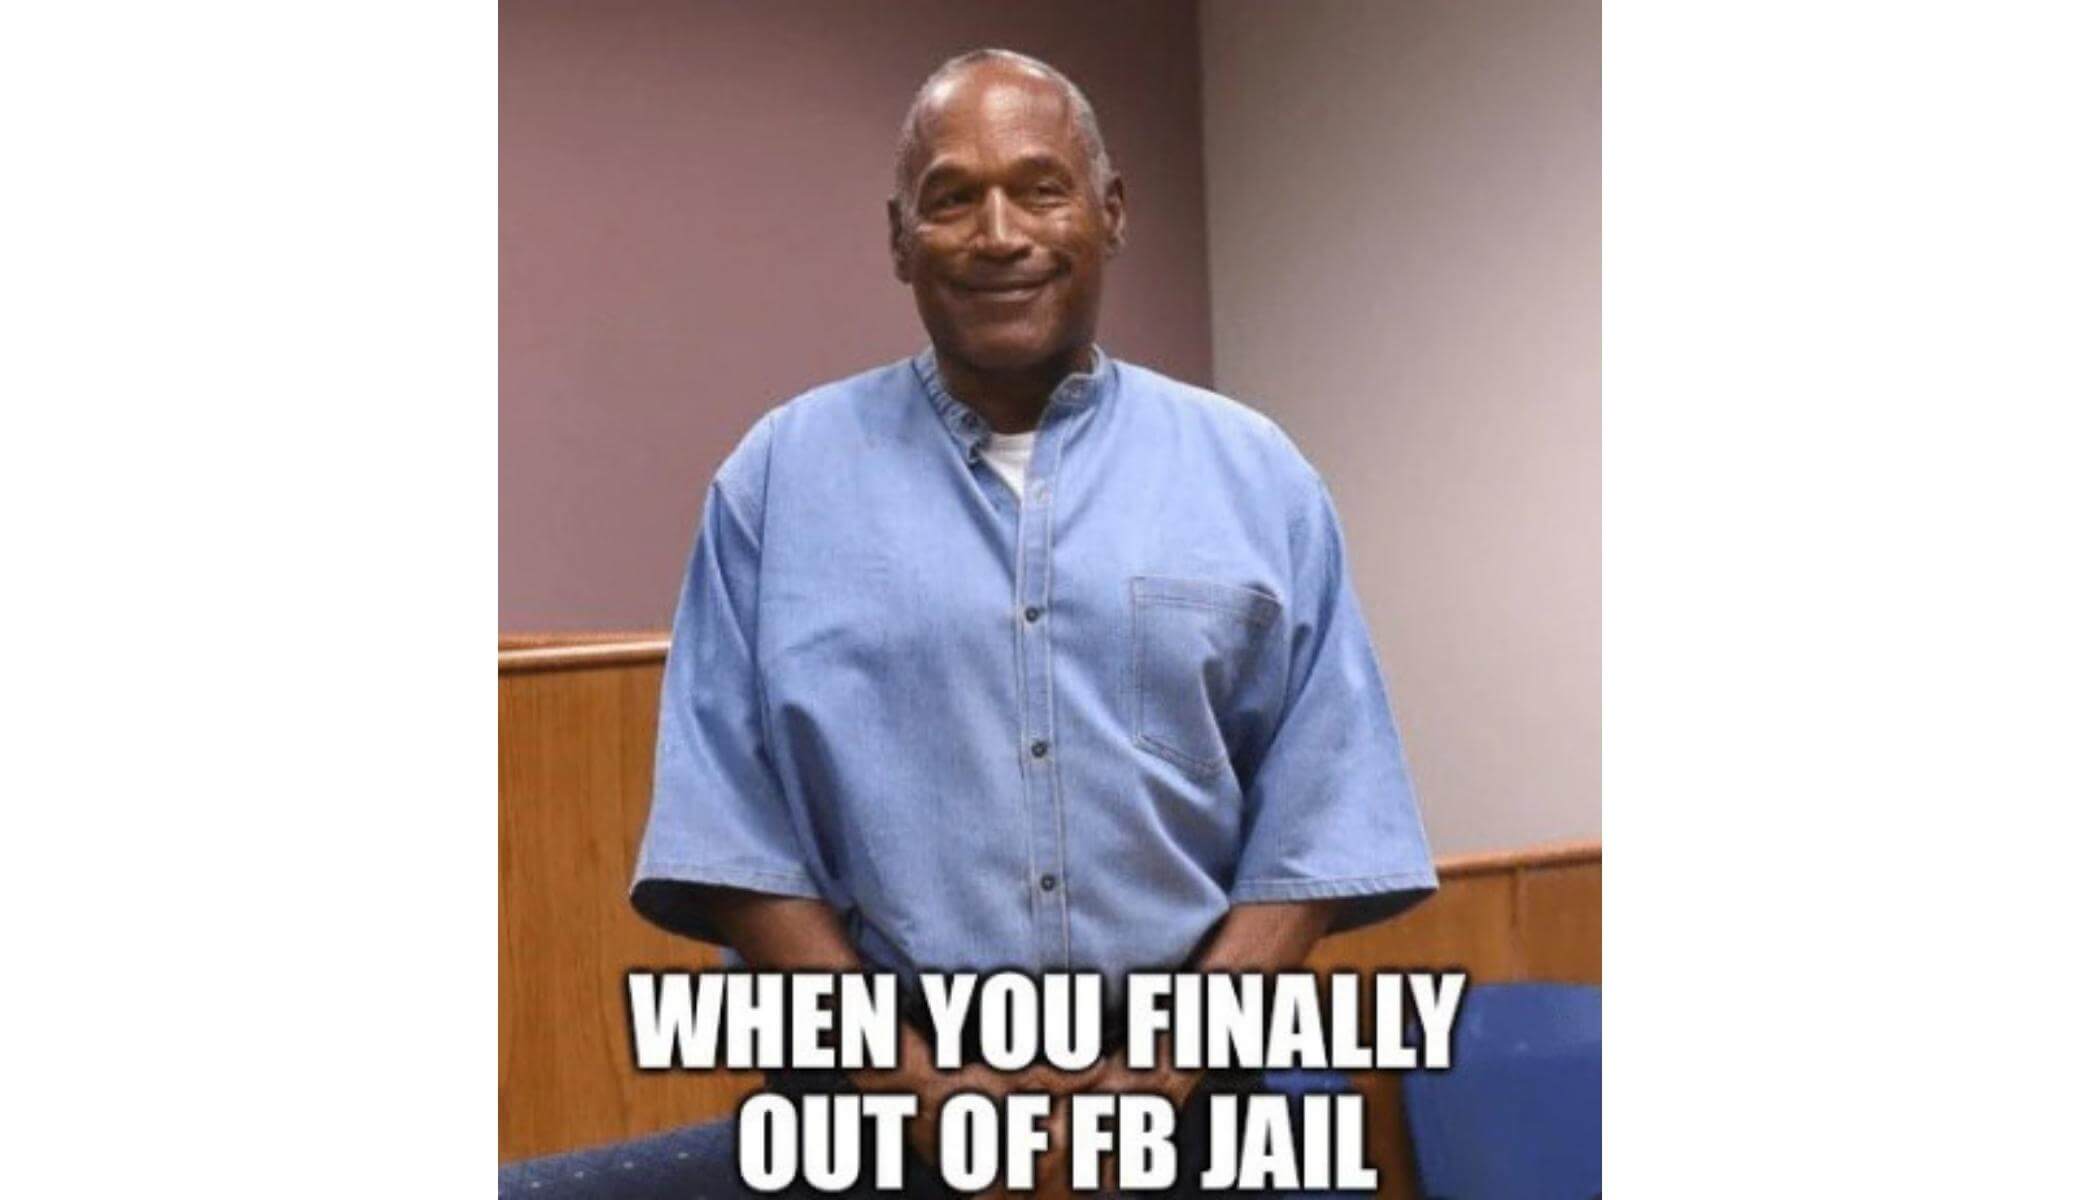 Finally out of Facebook jail